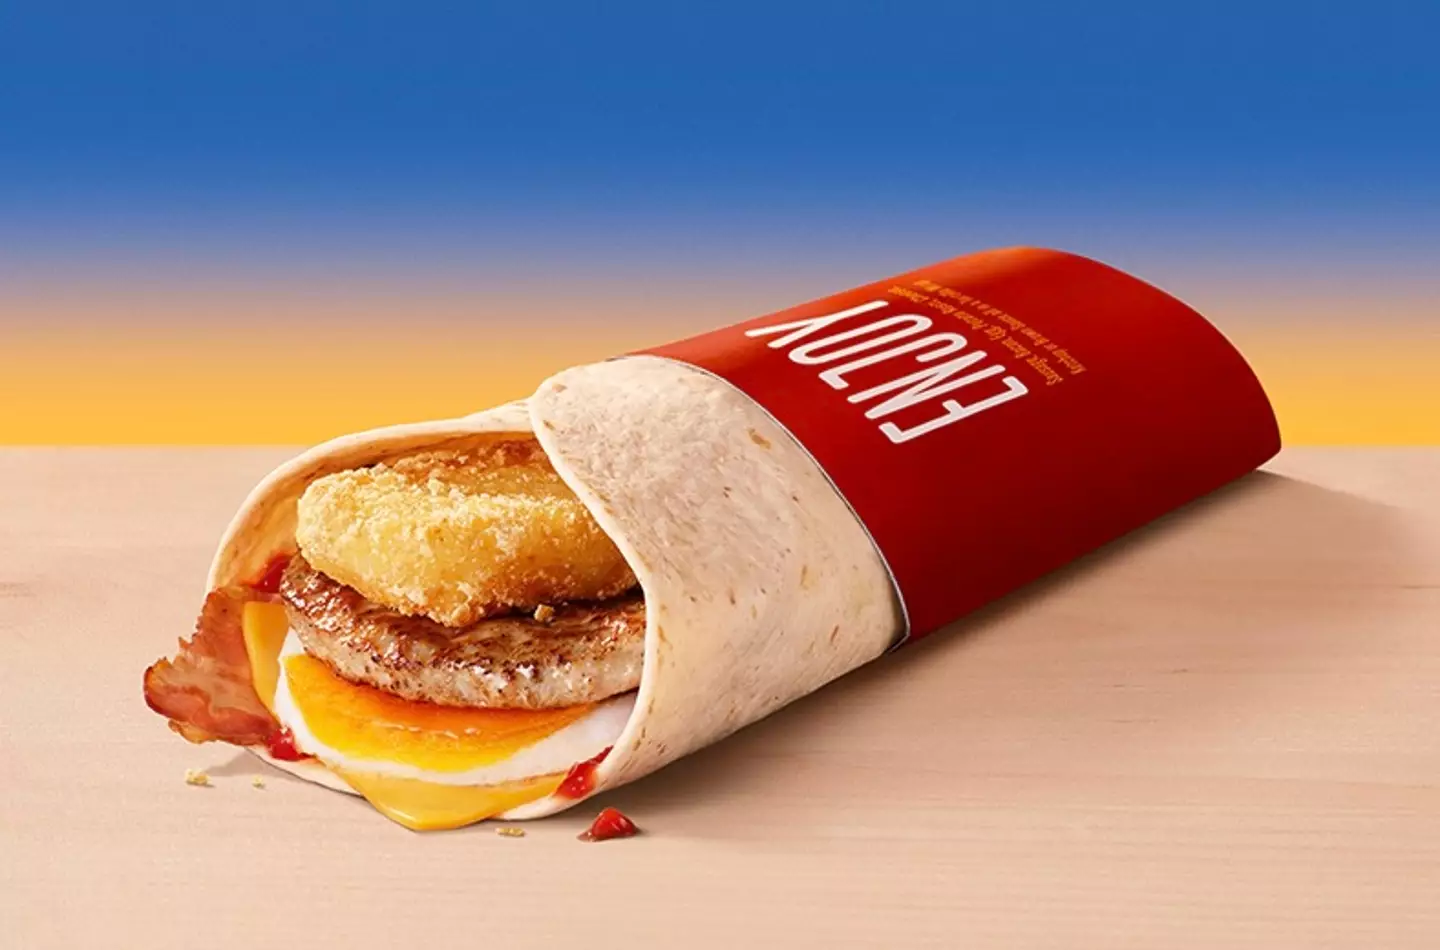 The new and improved Breakfast Wrap is available from today.